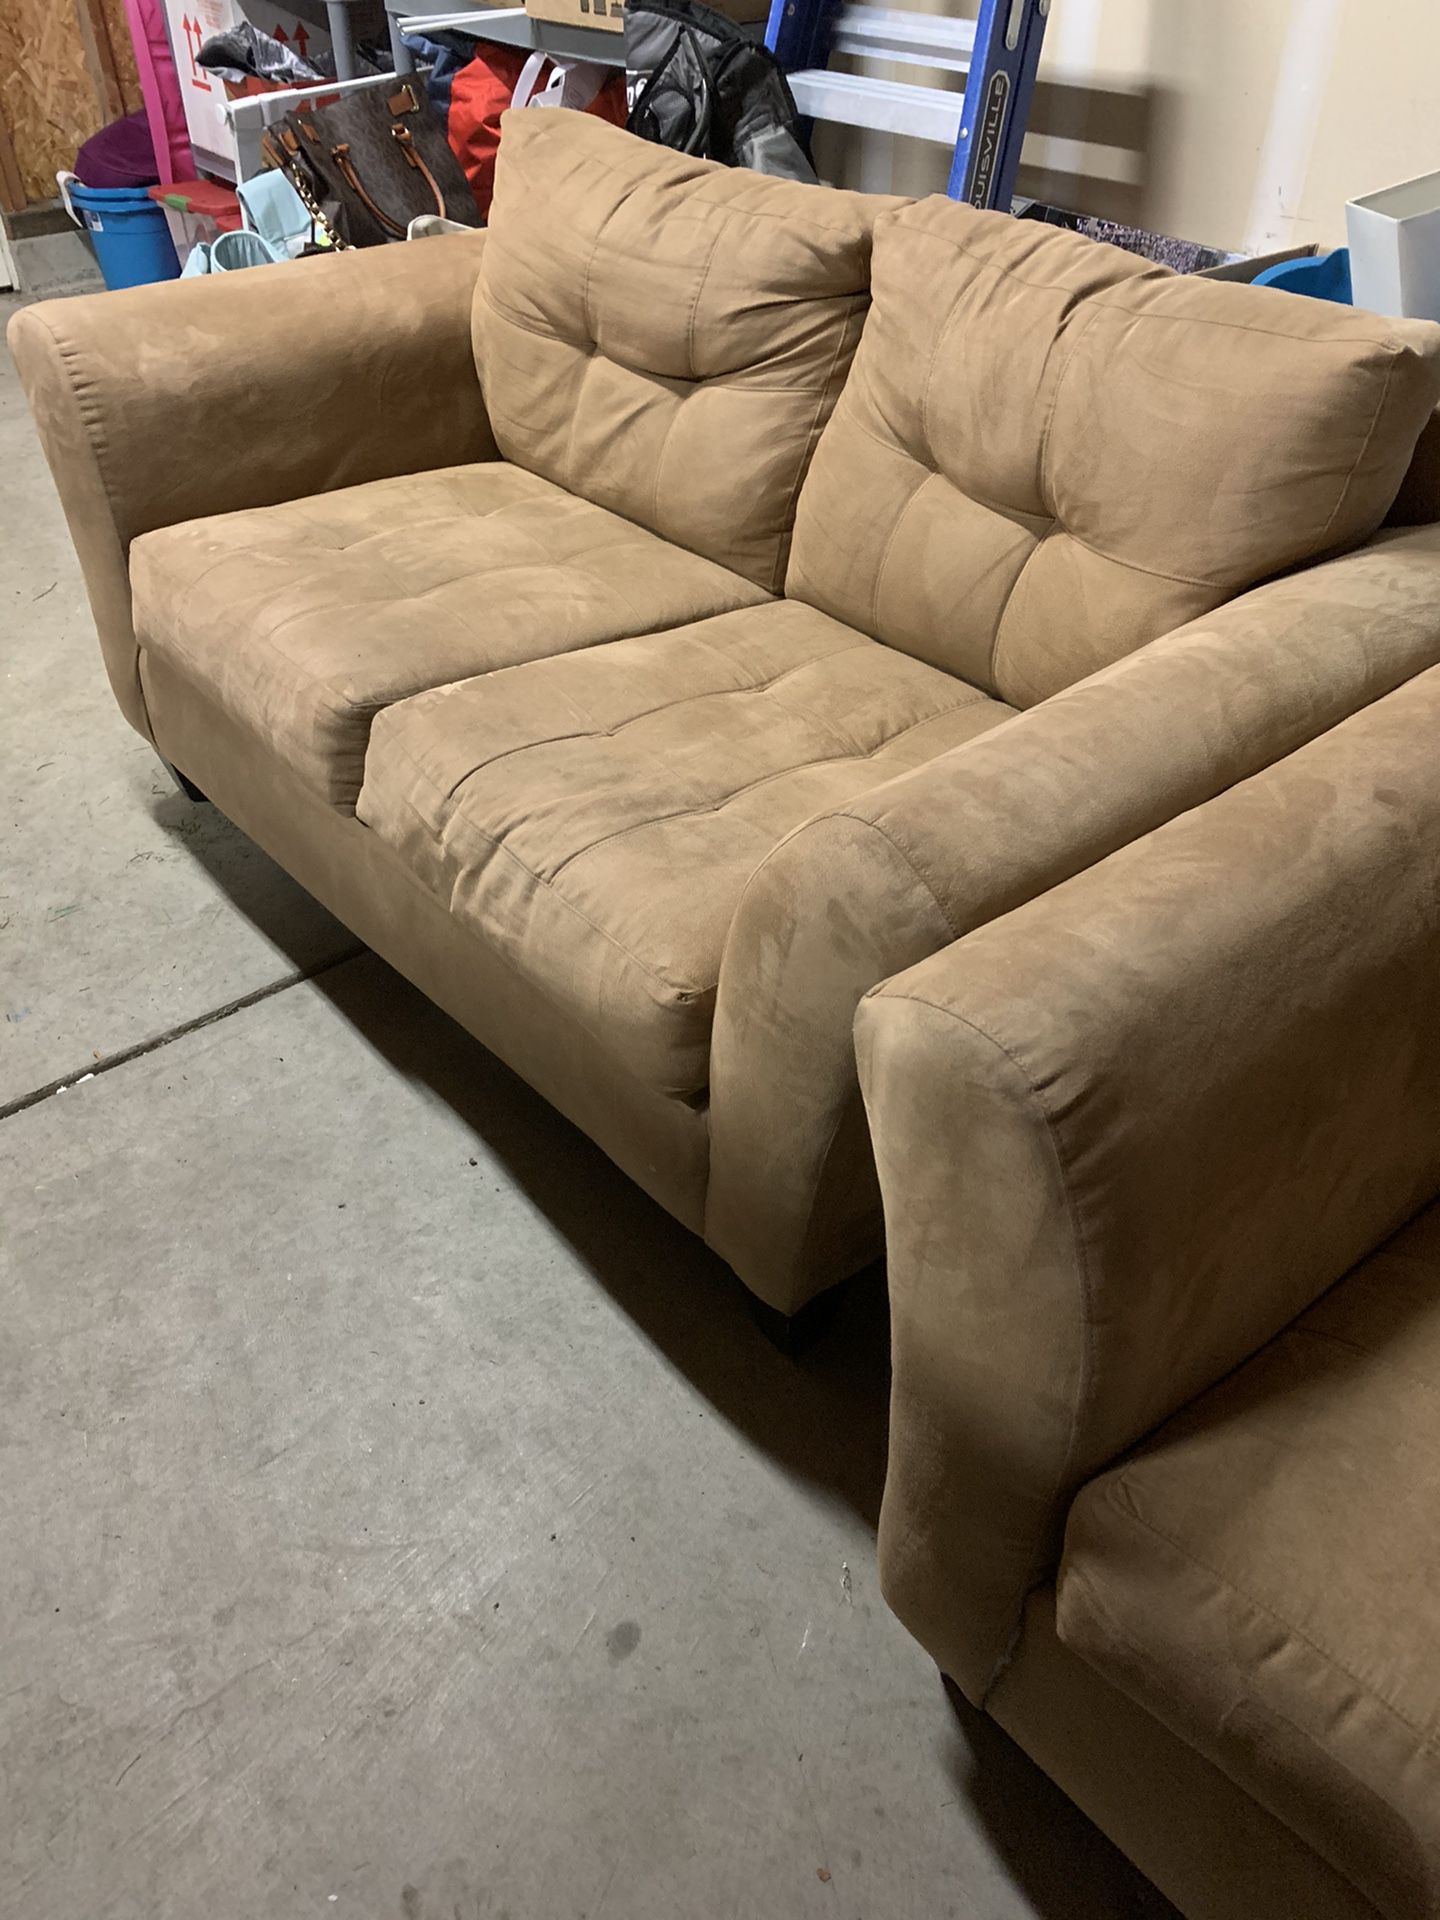 Two couches